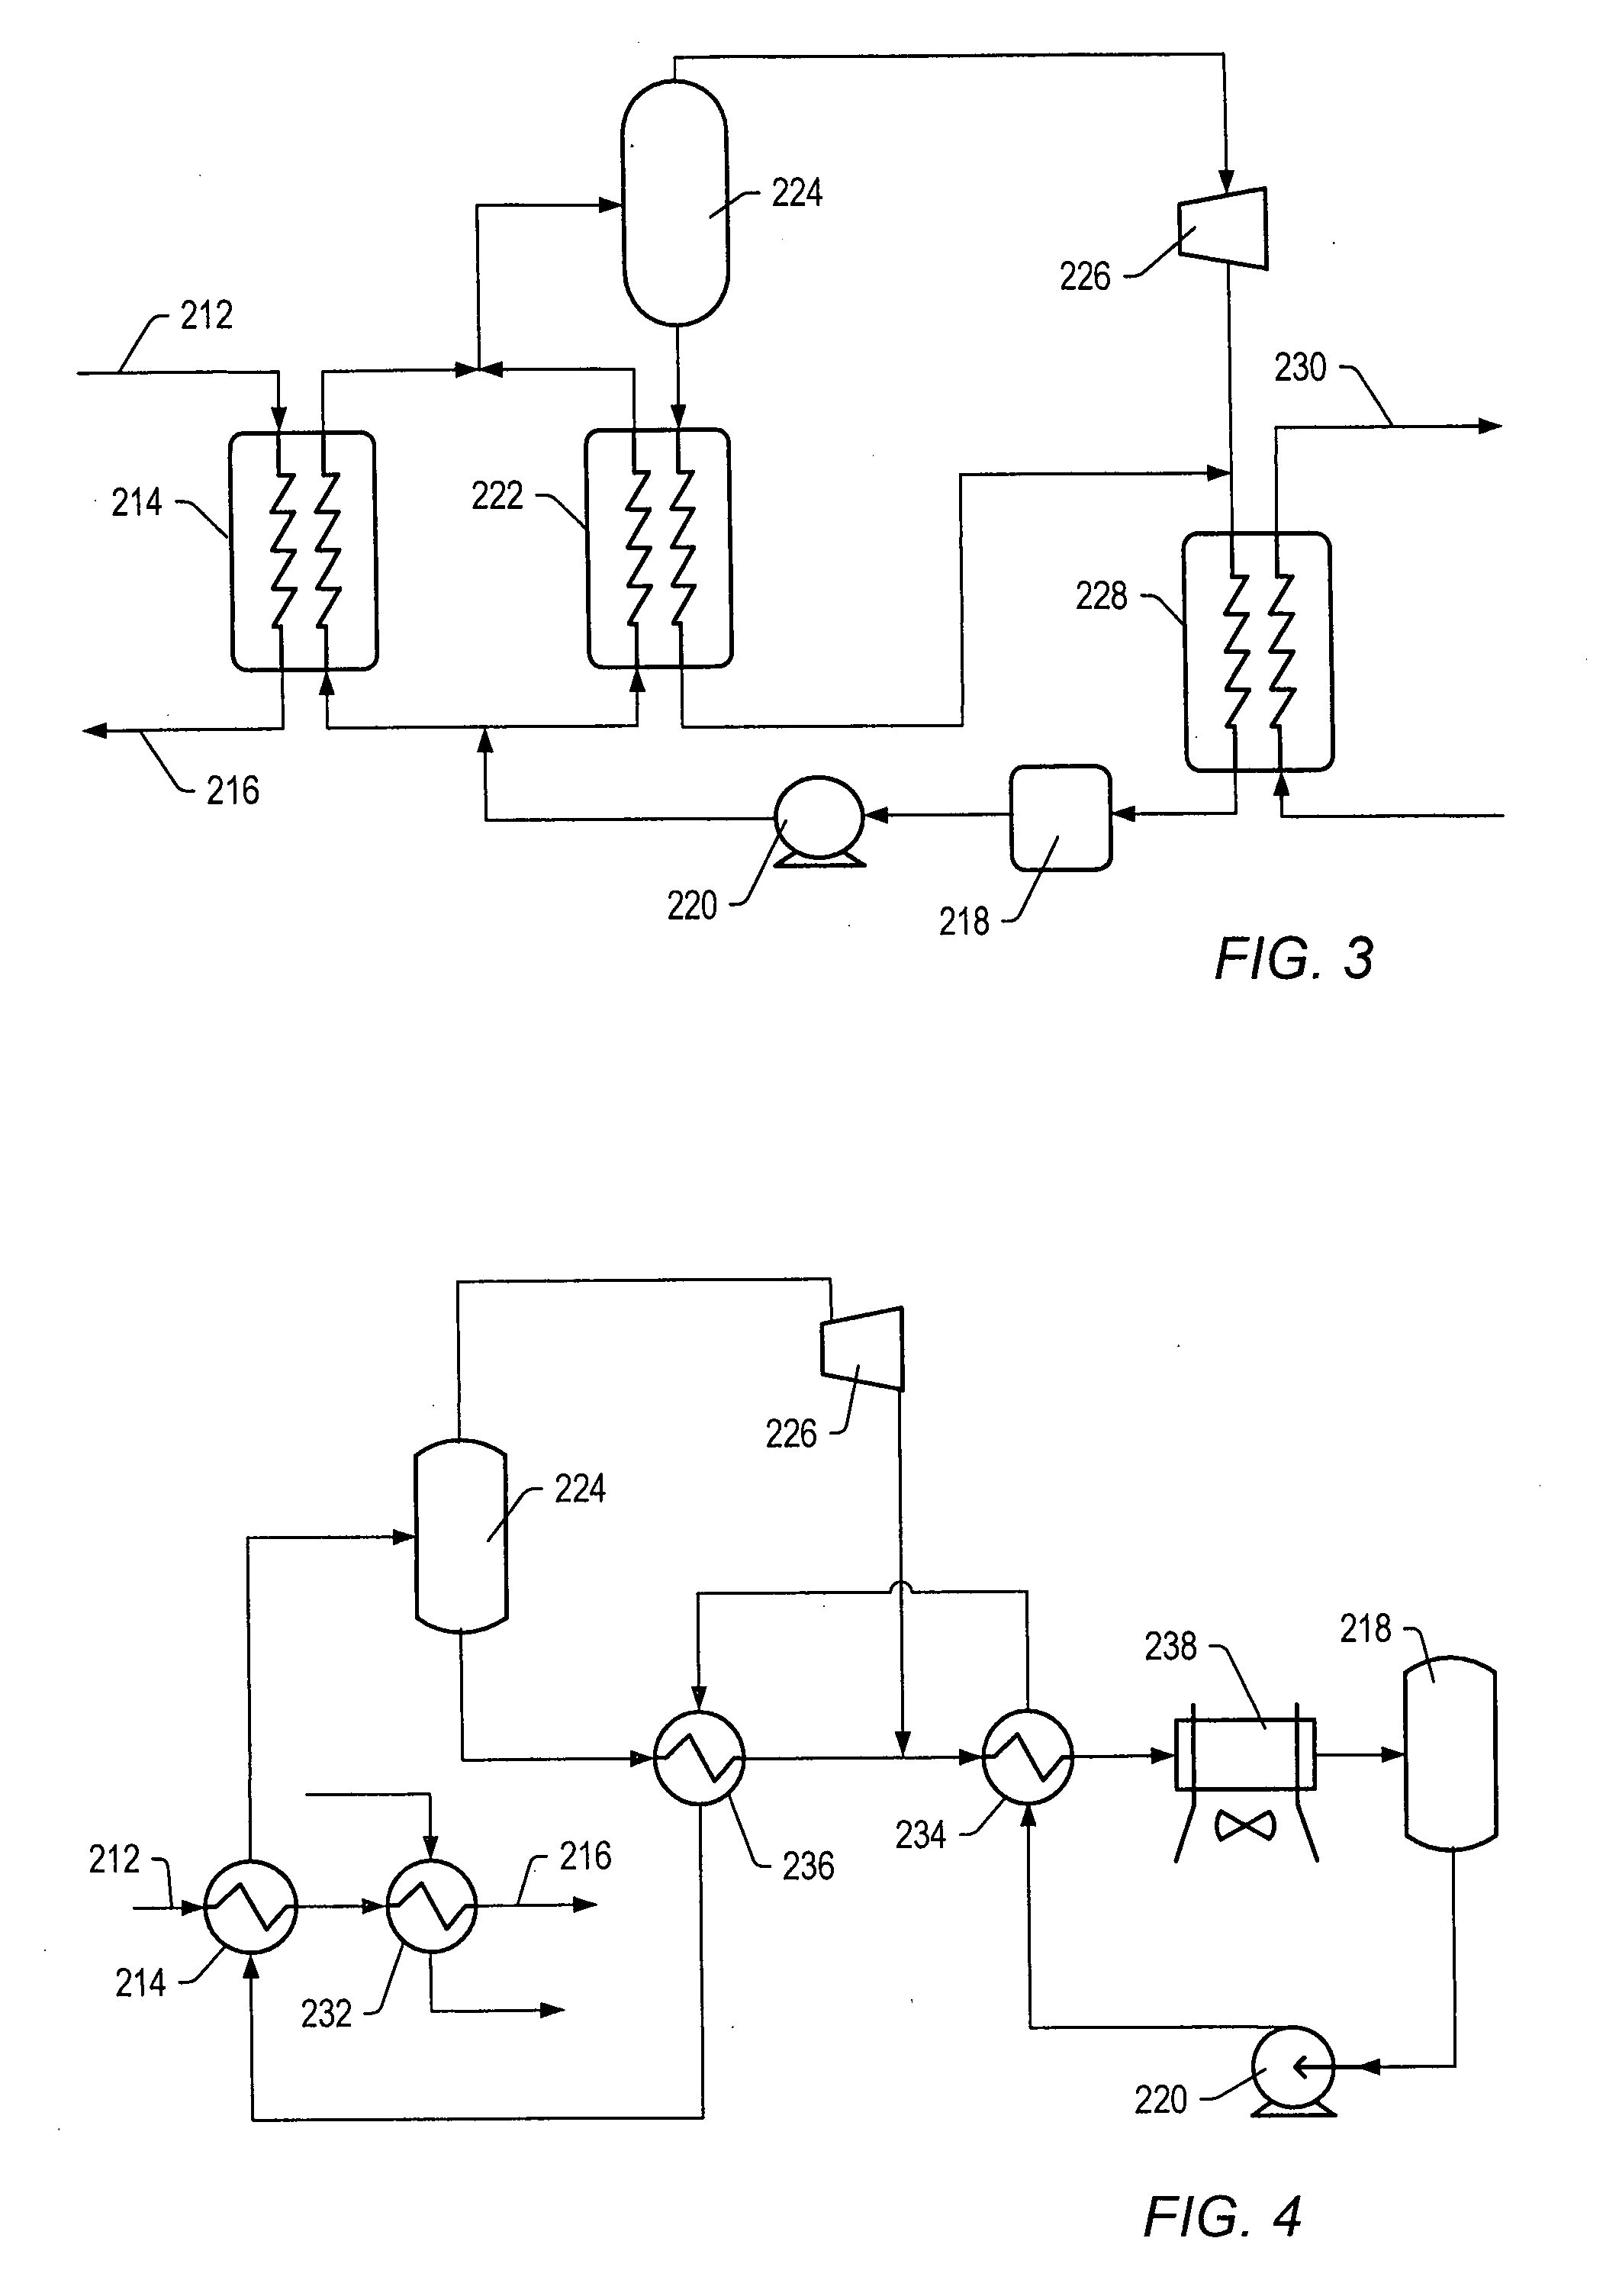 Compositions produced using an in situ heat treatment process